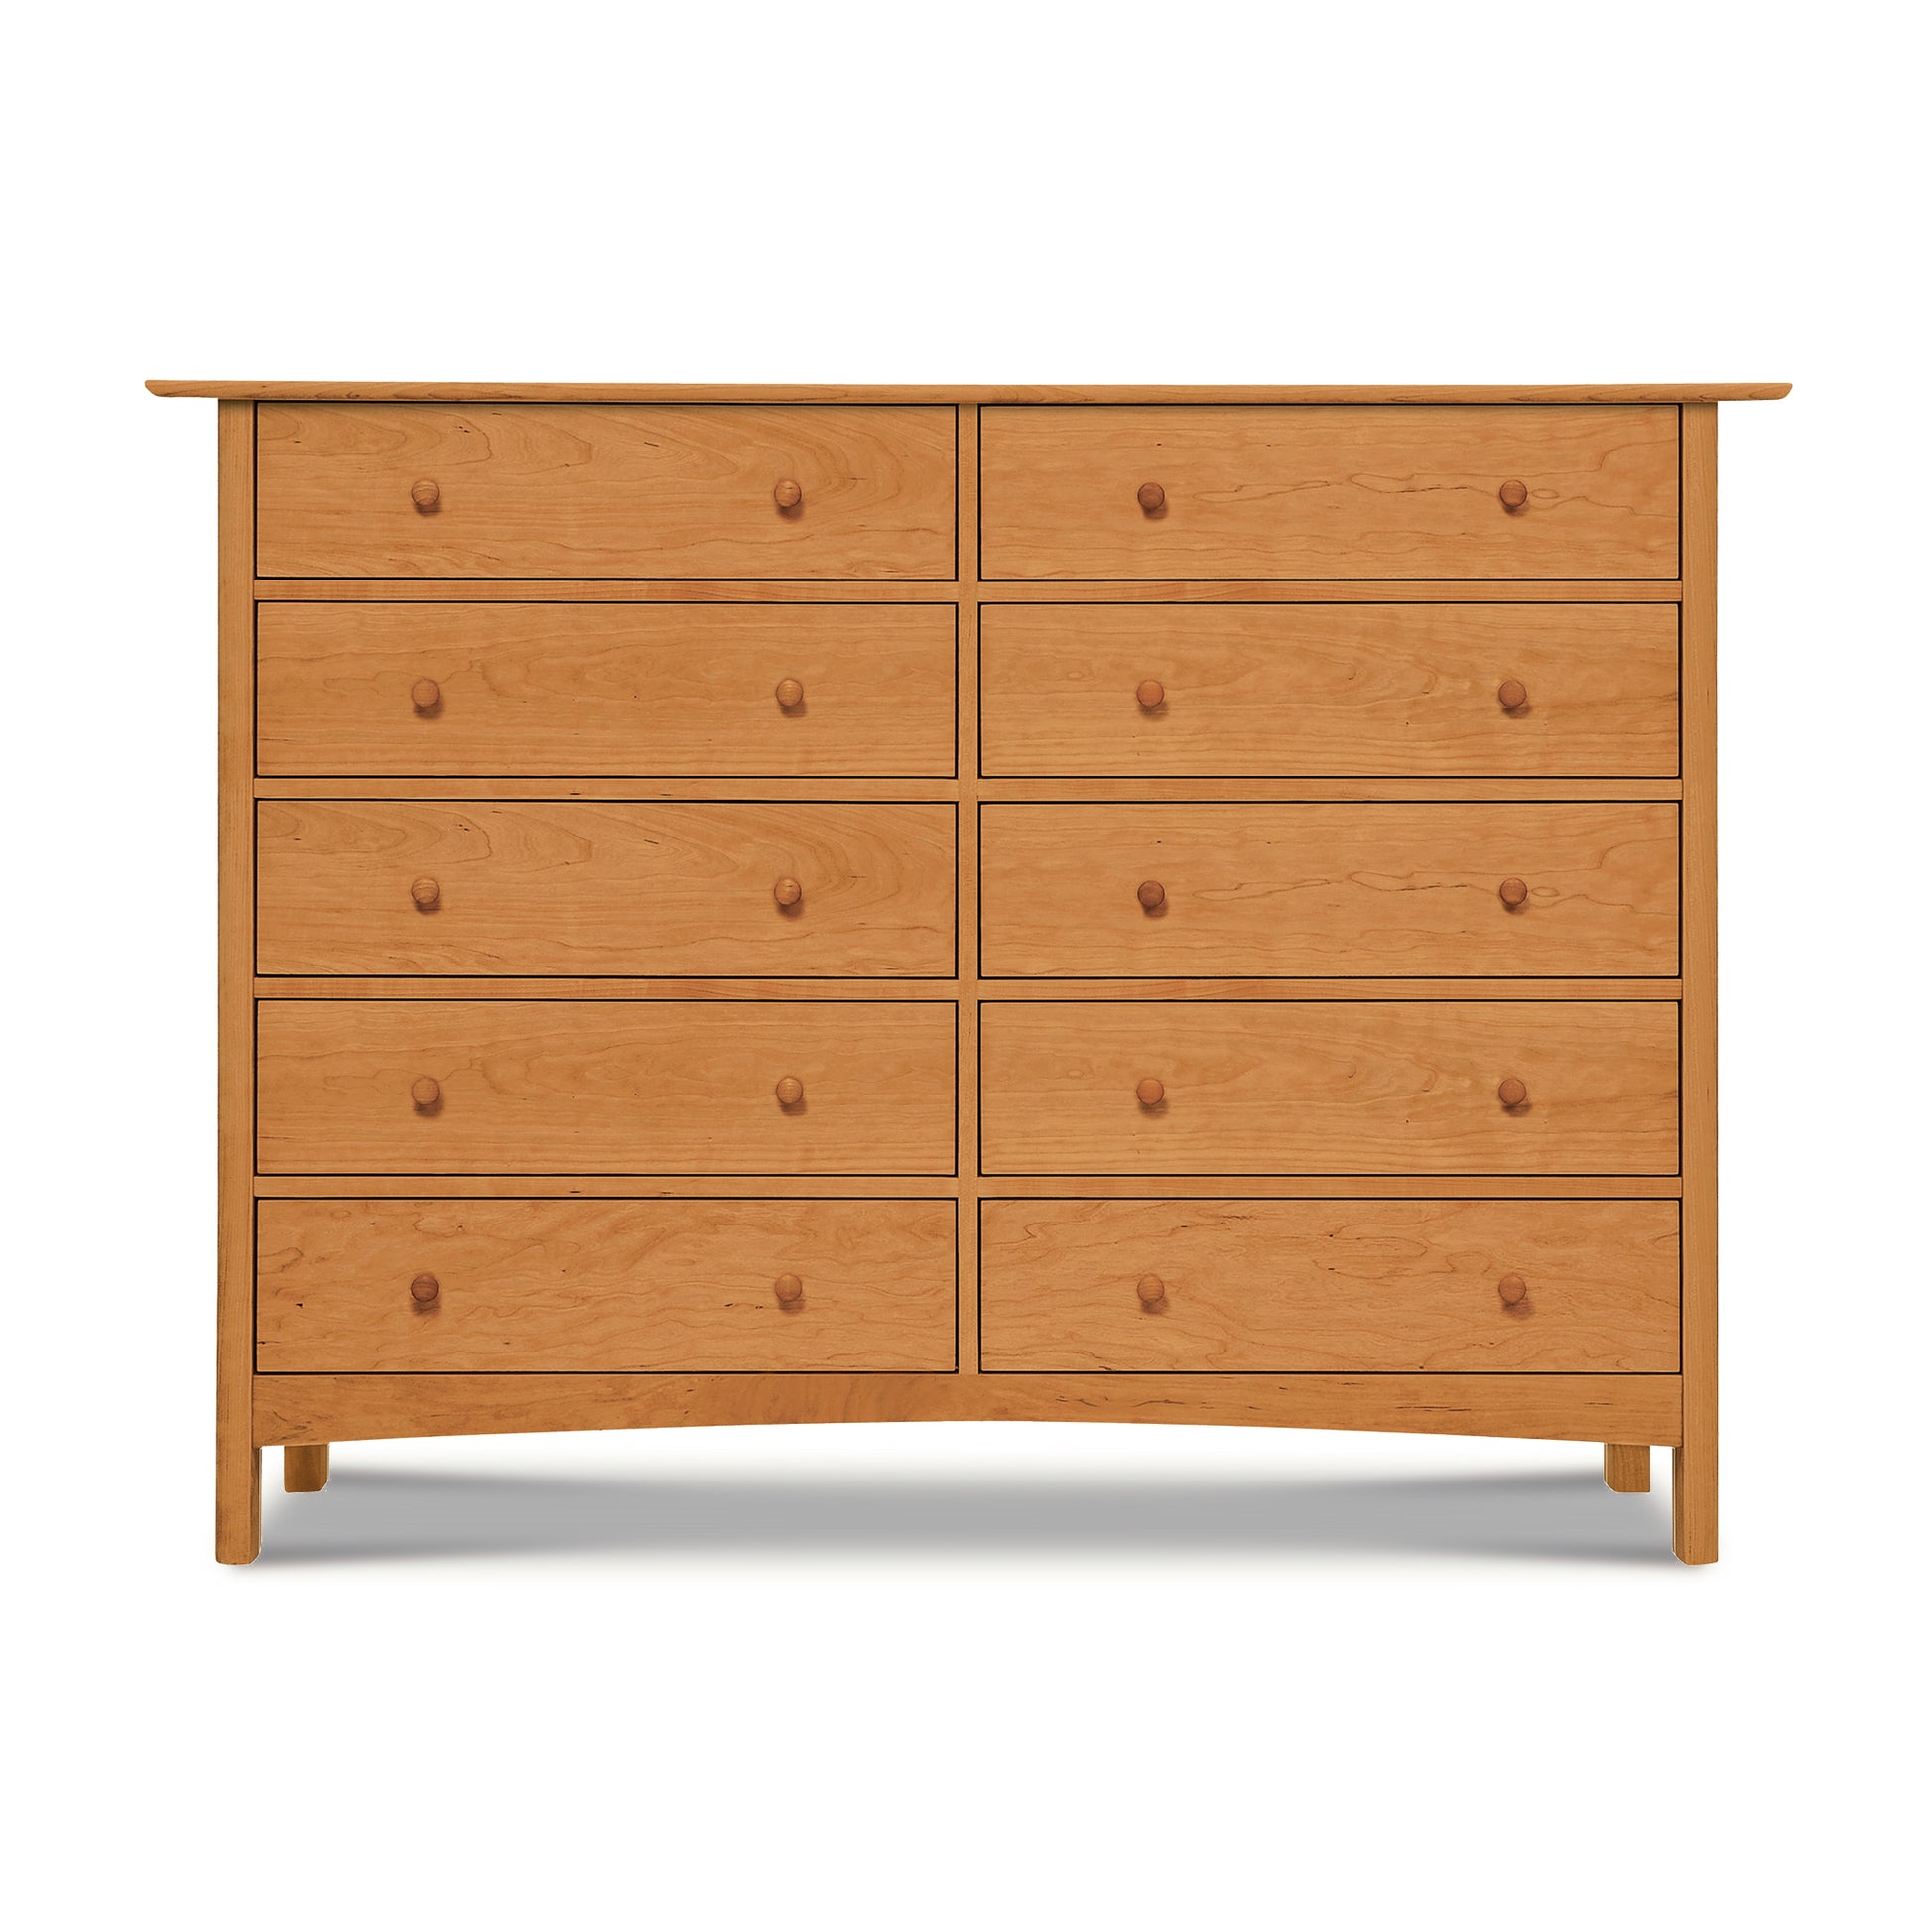 A high-quality Heartwood Shaker 10-Drawer Dresser made by Vermont Furniture Designs, displayed on a white background.